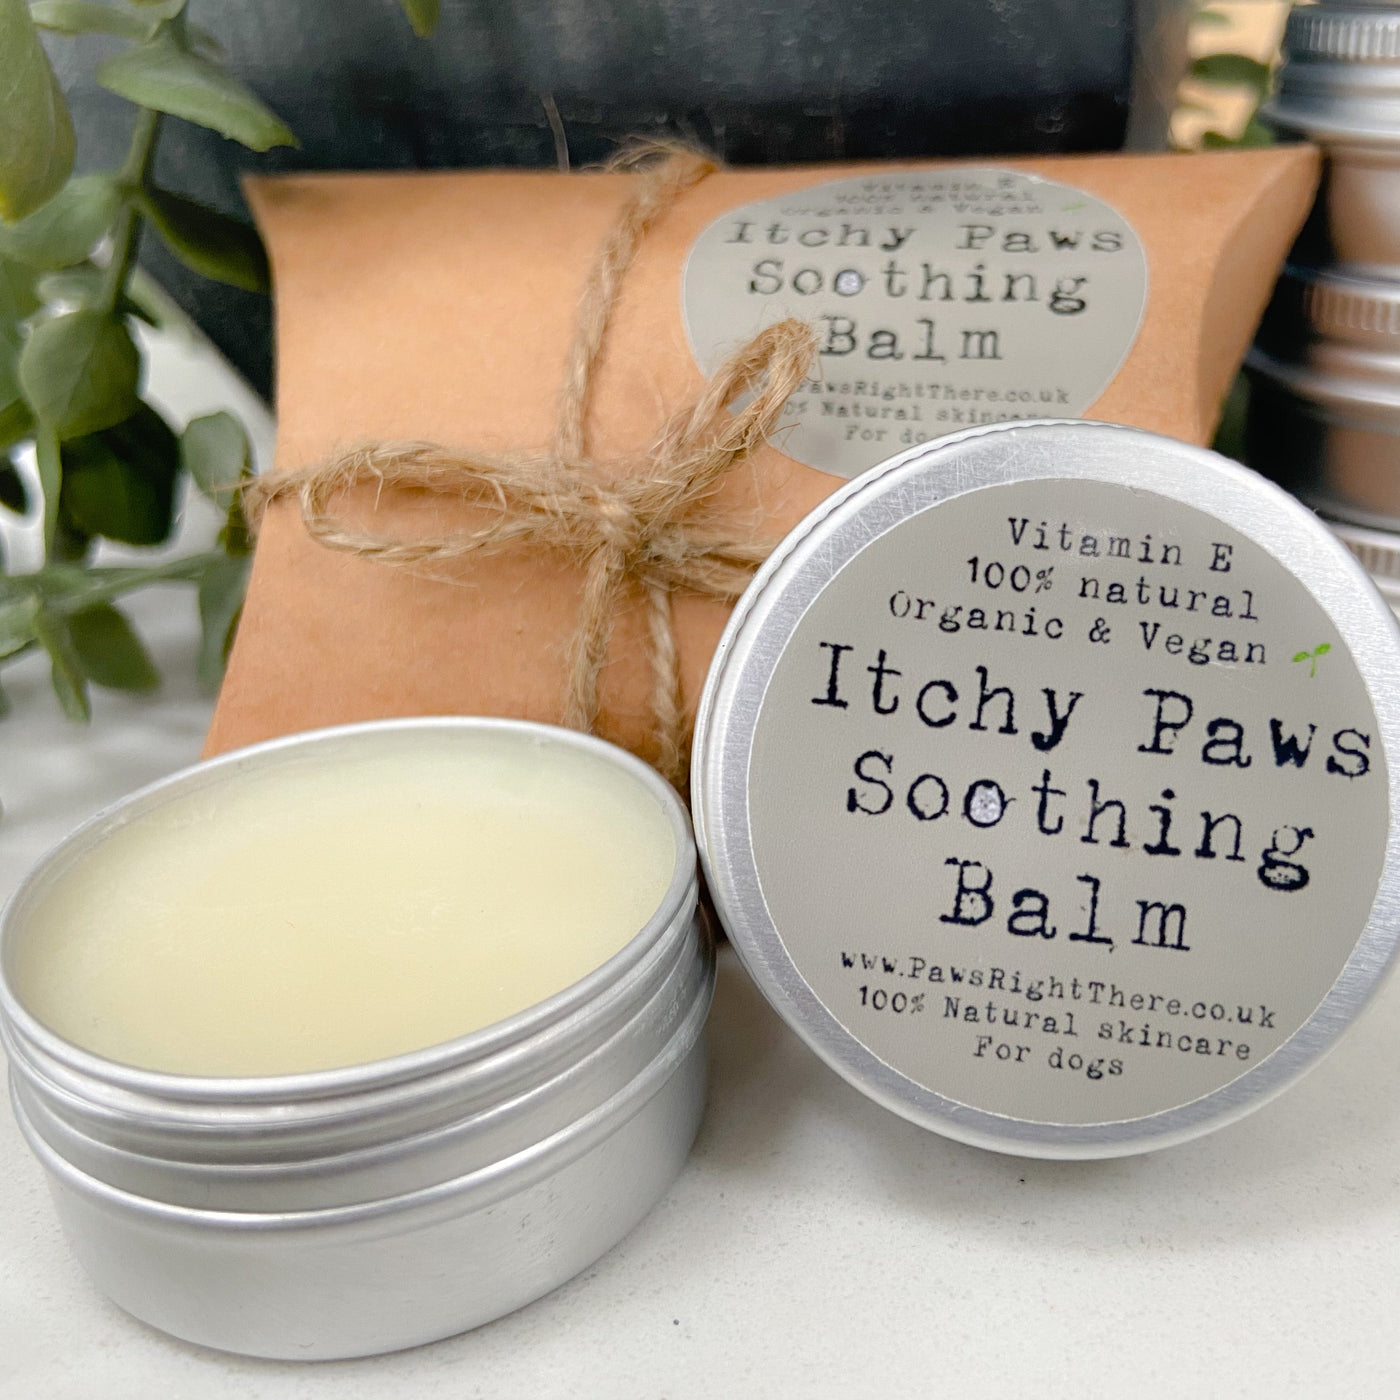 Itchy Paws Dog Soothing Balm organic and vegan-friendly.